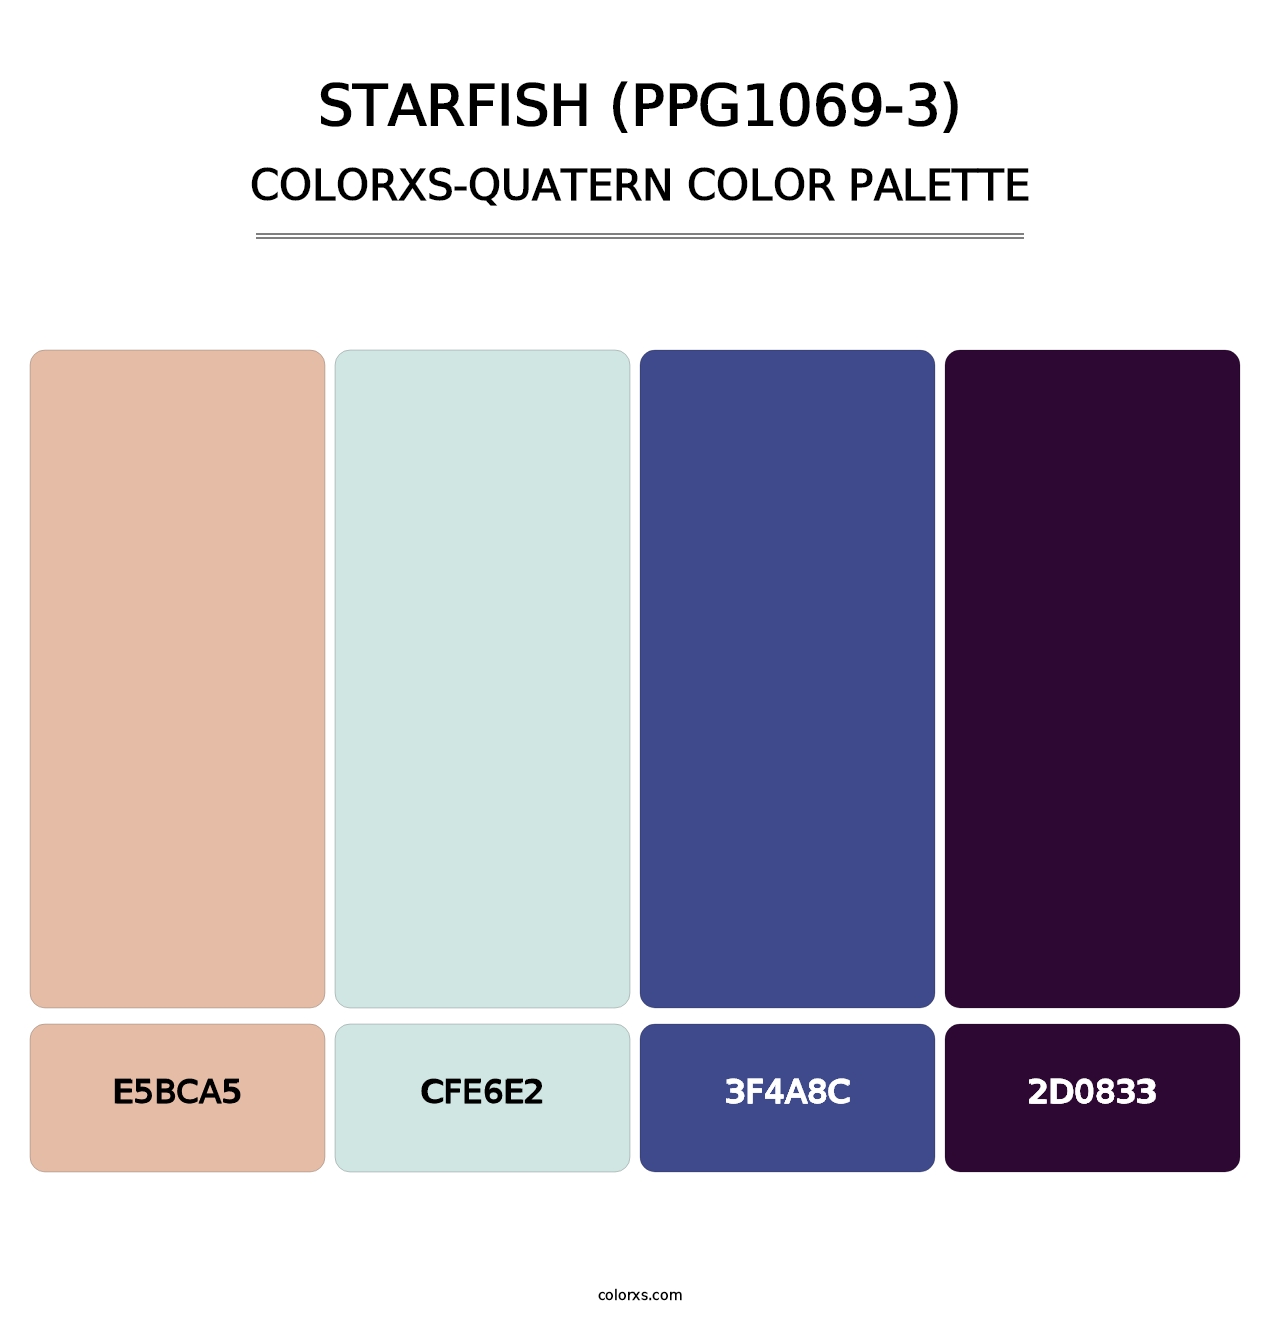 Starfish (PPG1069-3) - Colorxs Quatern Palette